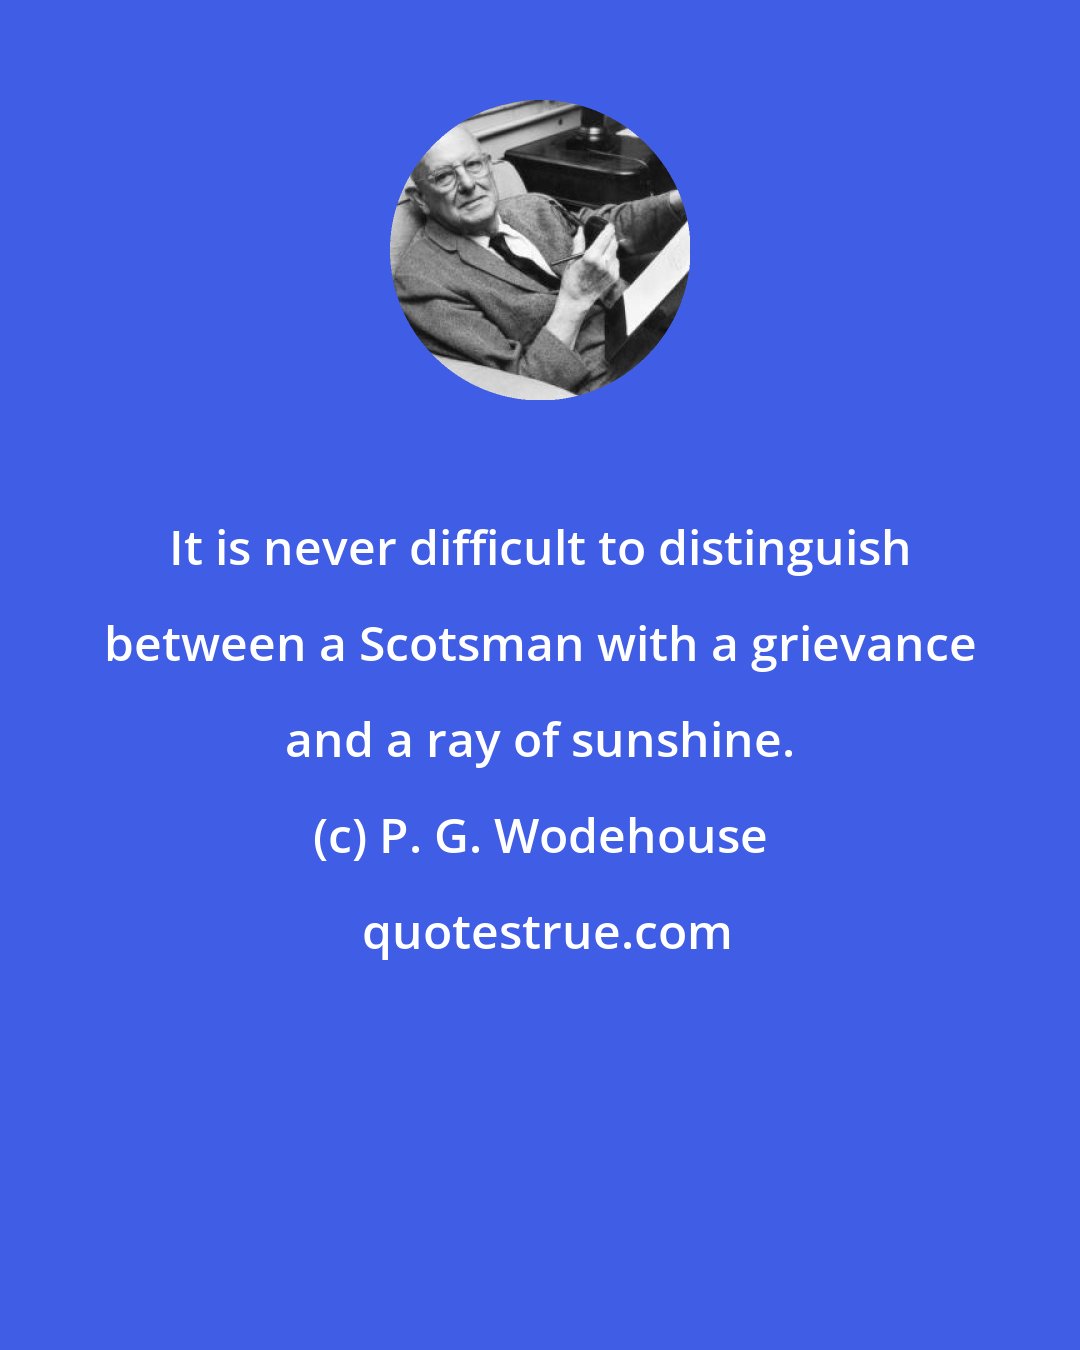 P. G. Wodehouse: It is never difficult to distinguish between a Scotsman with a grievance and a ray of sunshine.